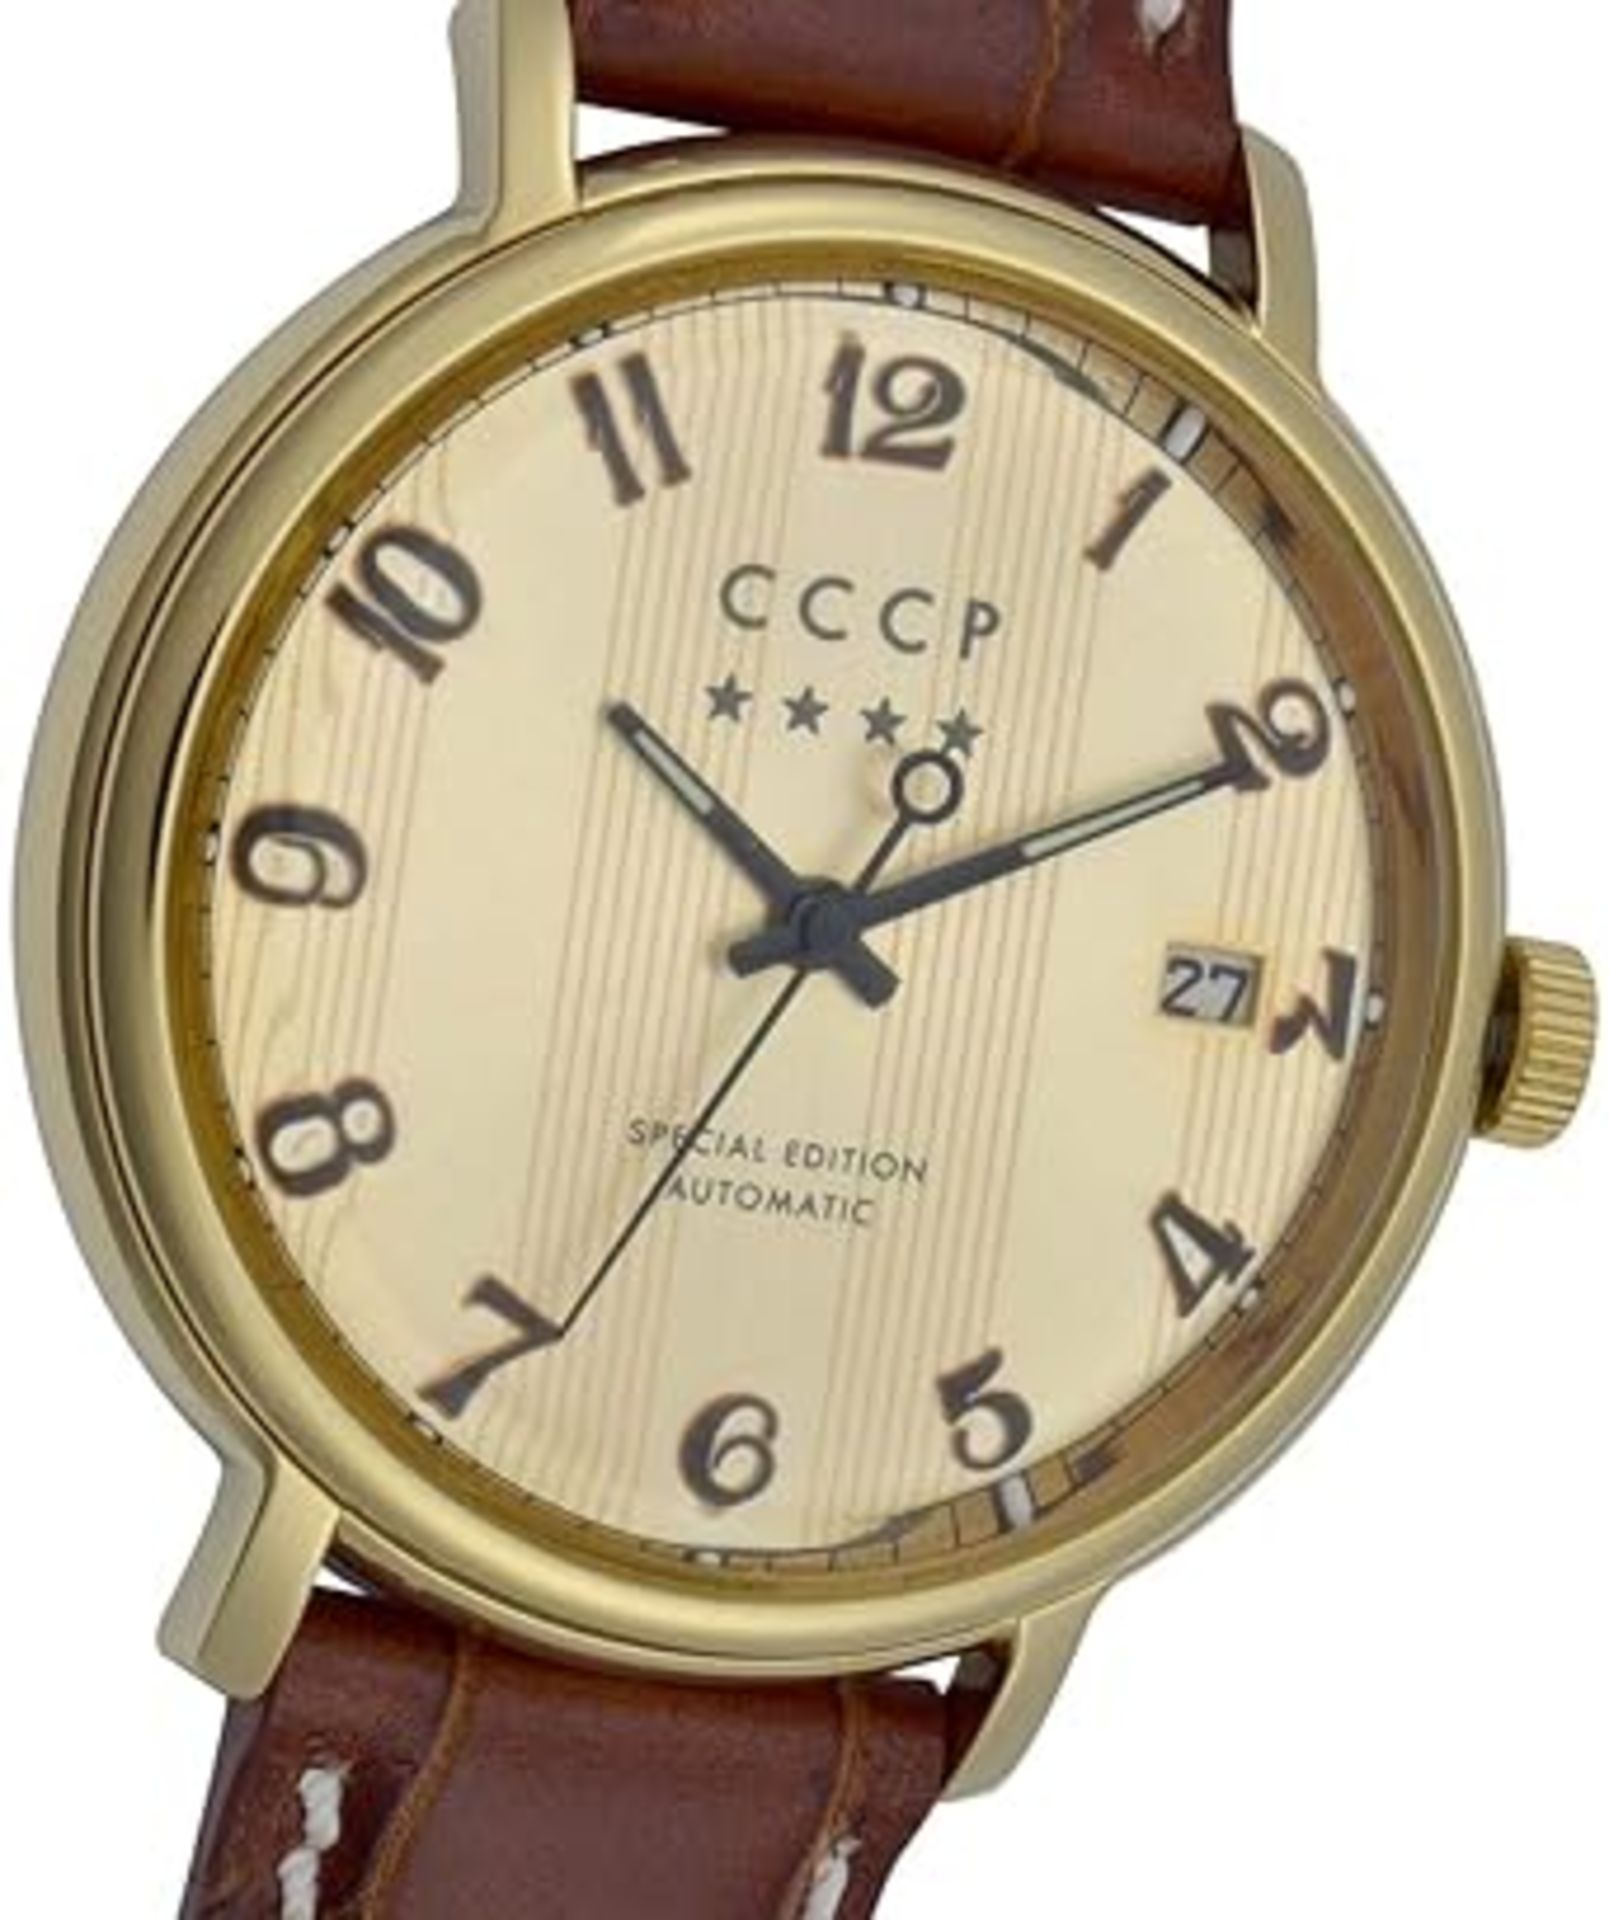 CCCP Men's CP-7021-03 Heritage Analog Display Automatic Self-Wind Brown Watch - Image 2 of 7